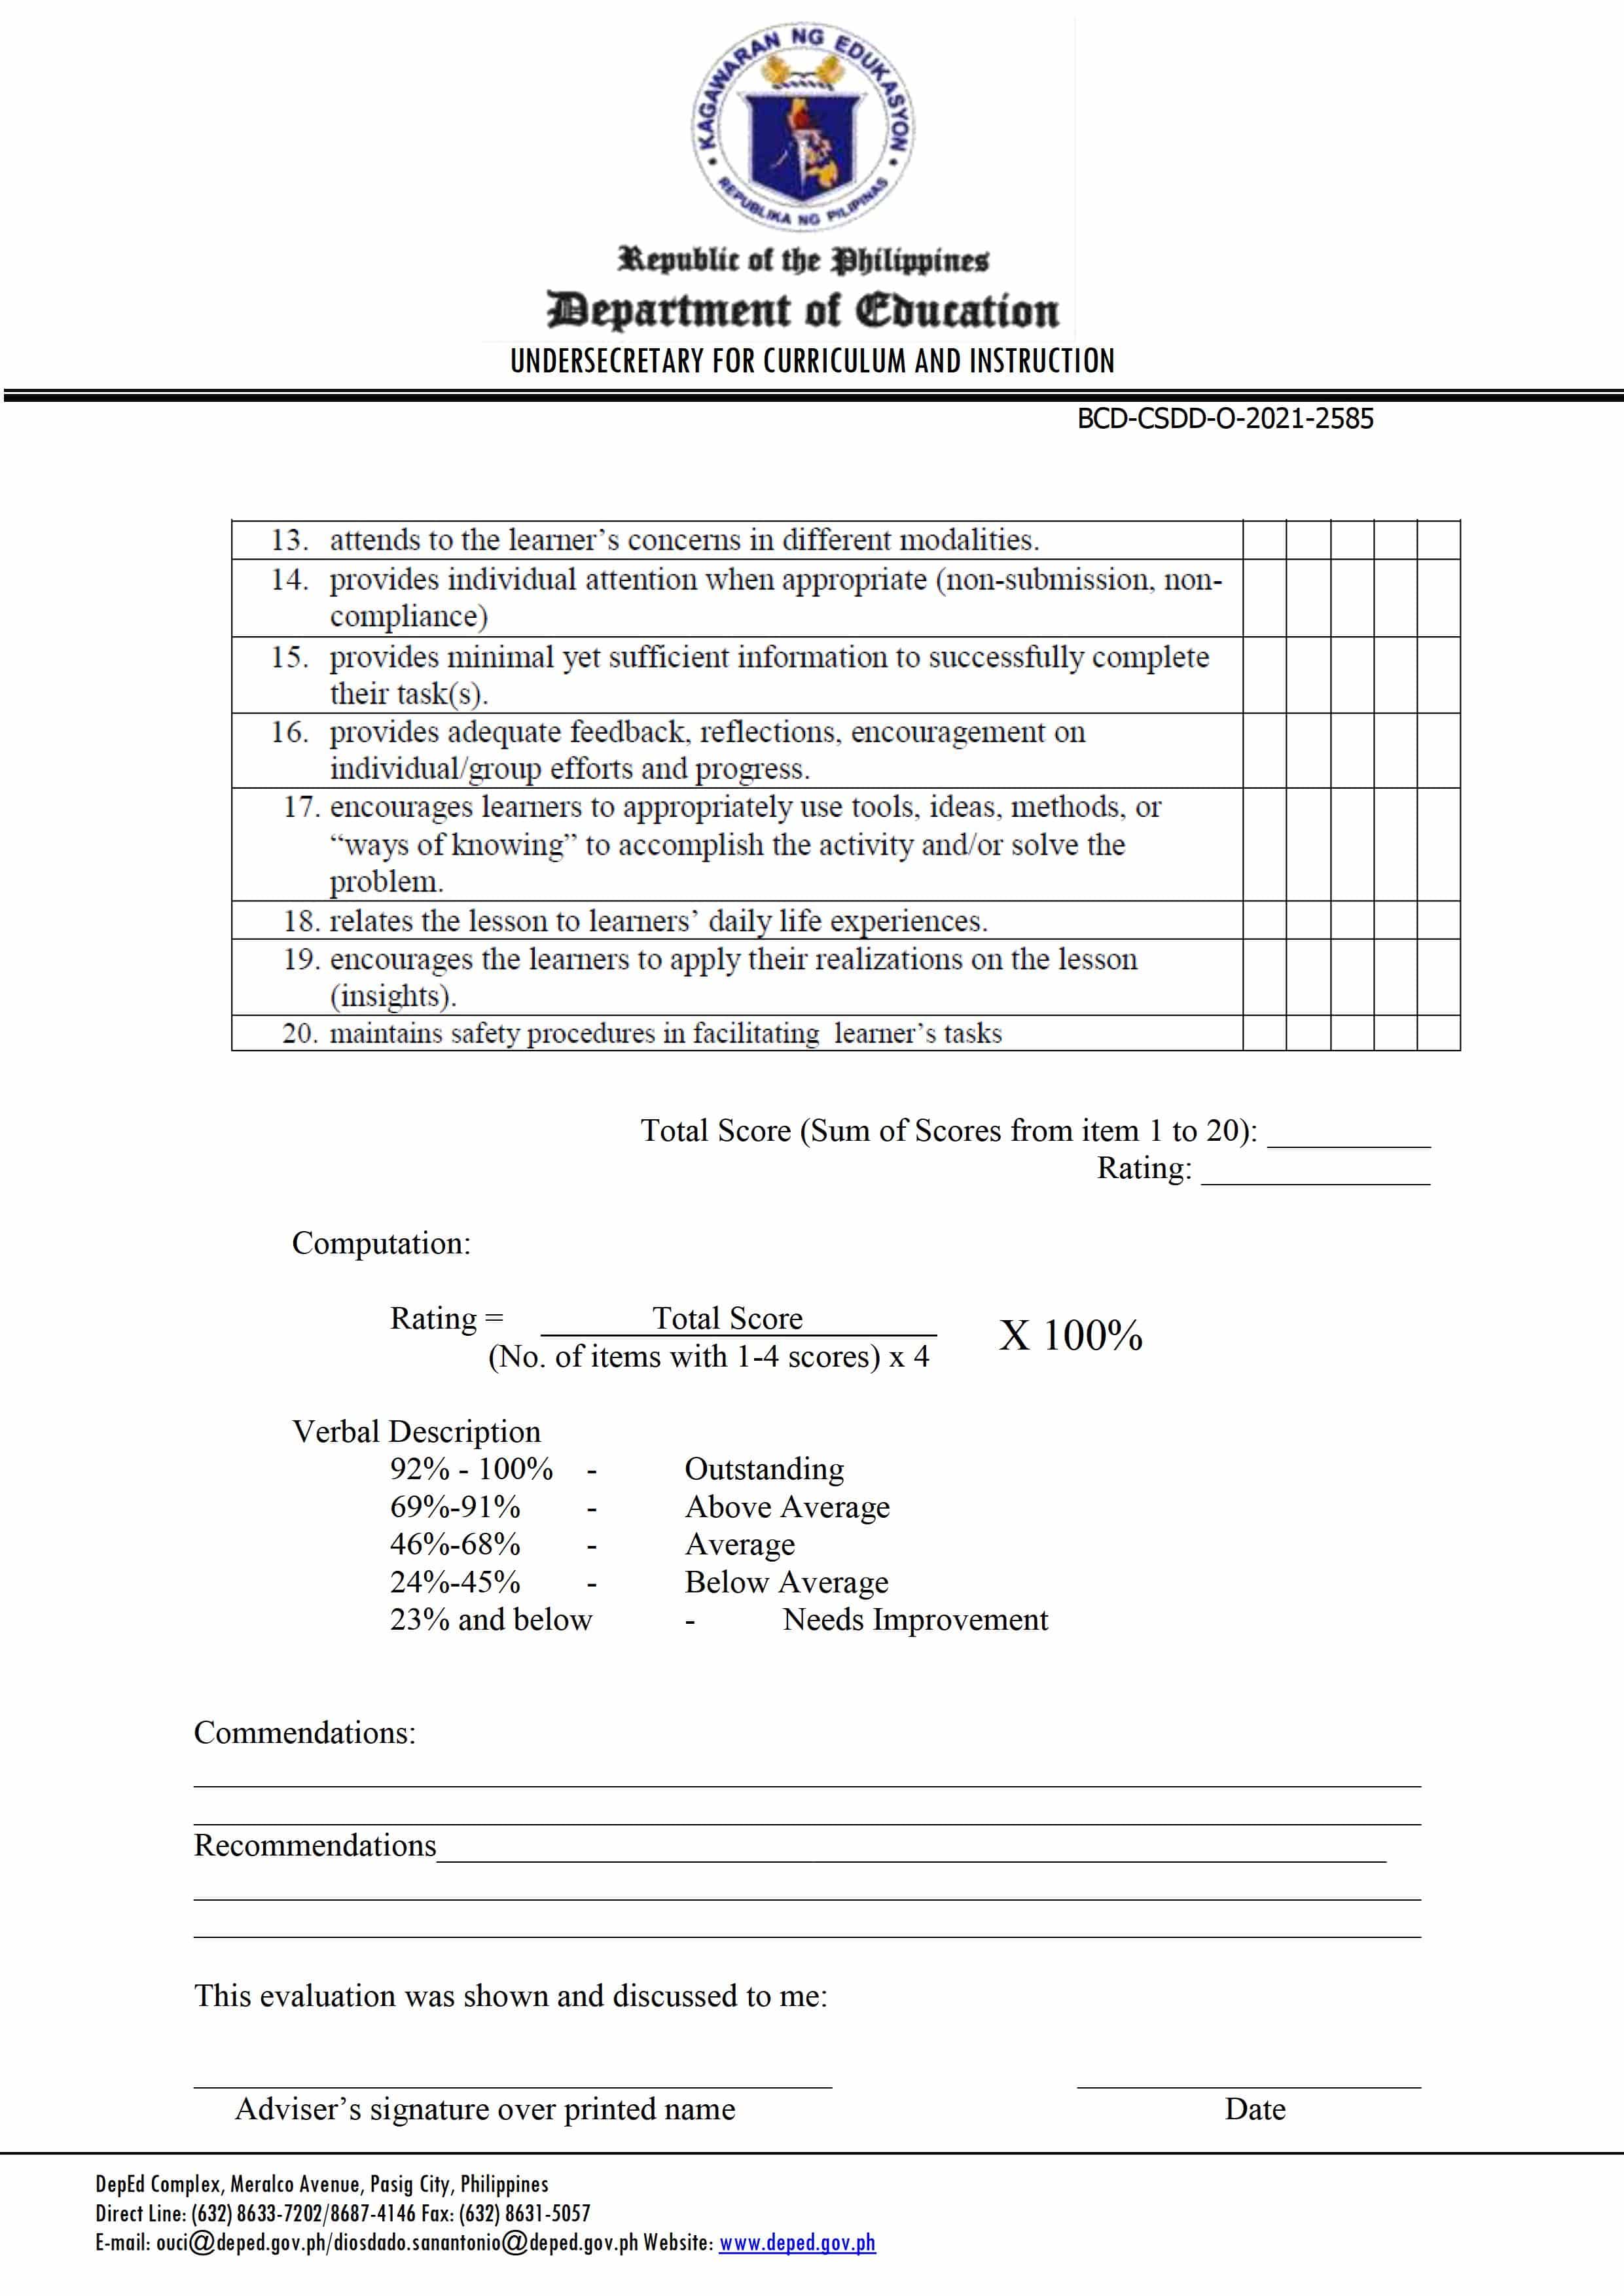 Homeroom Guidance Class Observation Tool For School Year 2021 2022 Page 2 